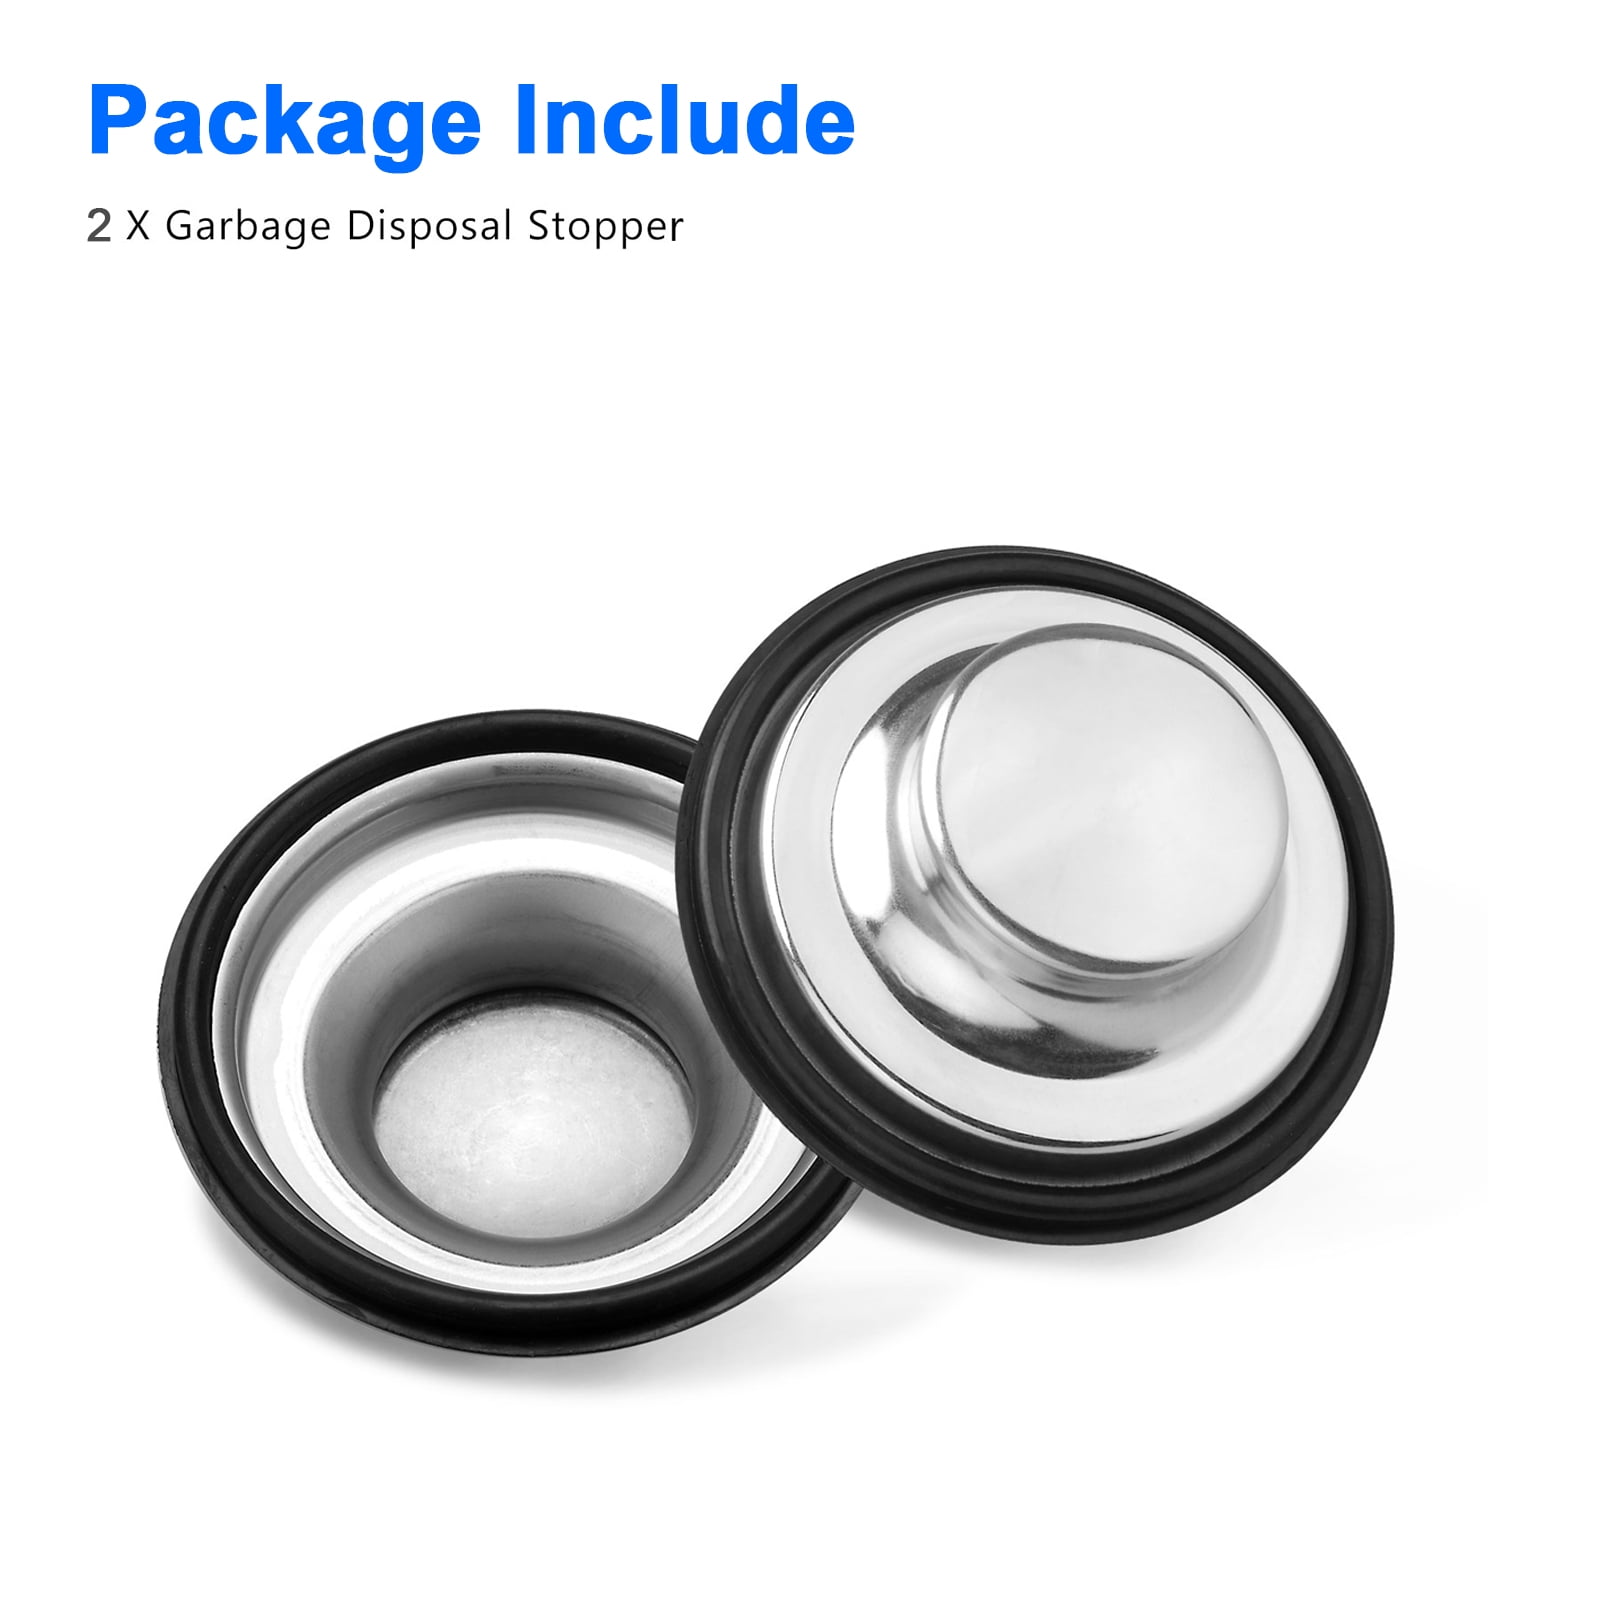 Tifanso Kitchen Sink Drain Stopper - 2PCS Garbage Disposal Stopper 3.34  Inch Sink Drain Plug, Stainless Steel Kitchen Sink Drain Cover Fits  Standard